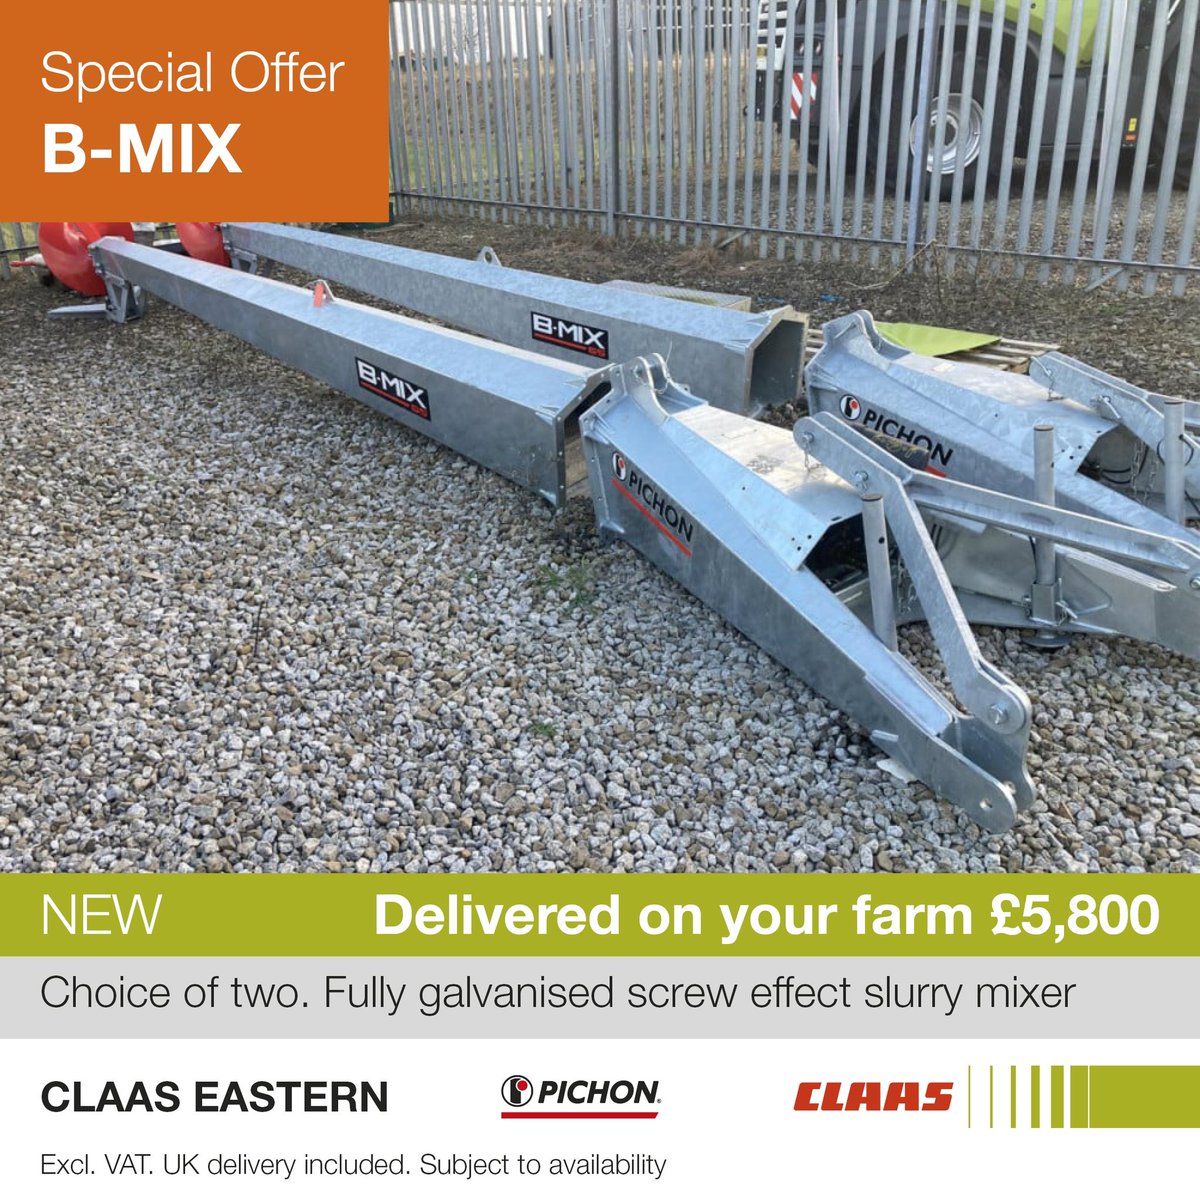 Two left in stock Buy your Slurry mixer at 2023 price only at CLAAS EASTERN order via your CLAAS EASTERN salesman or email Richard.sharman@claas.com £5800 +vat each